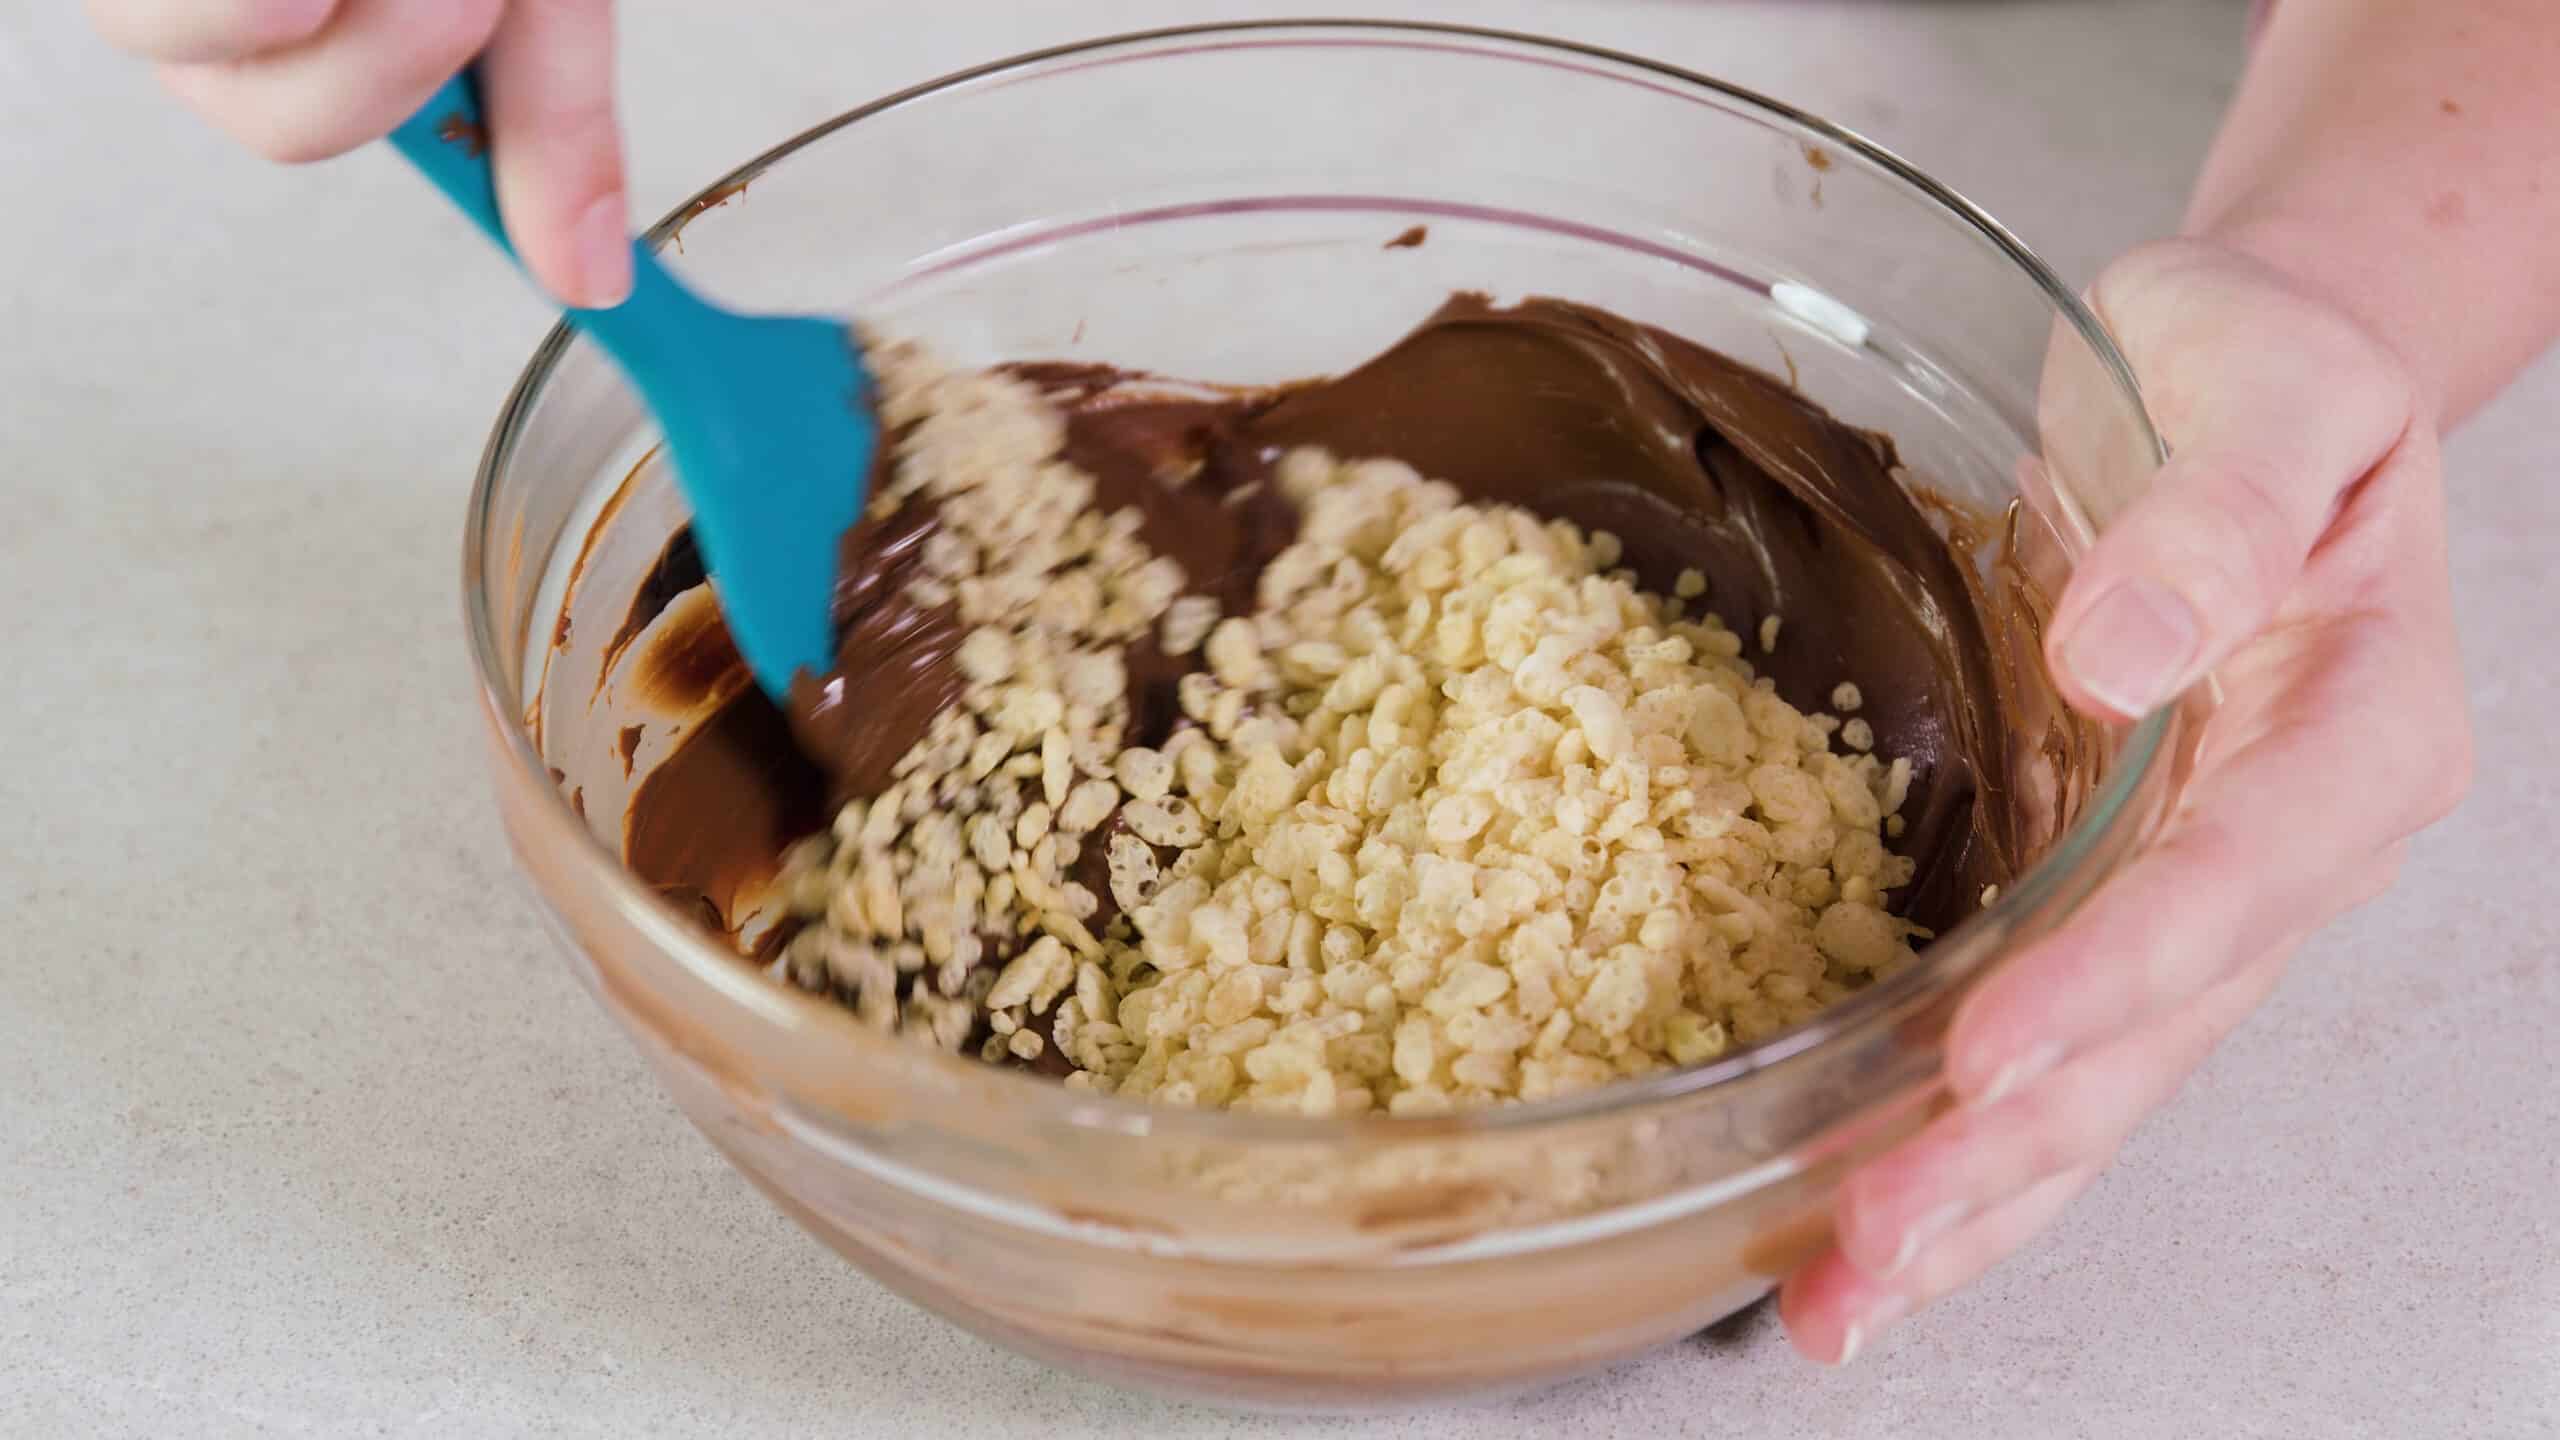 Angled view of large clear glass mixing bowl filled with melted chocolate and mixed with Rice Krispies Cereal.